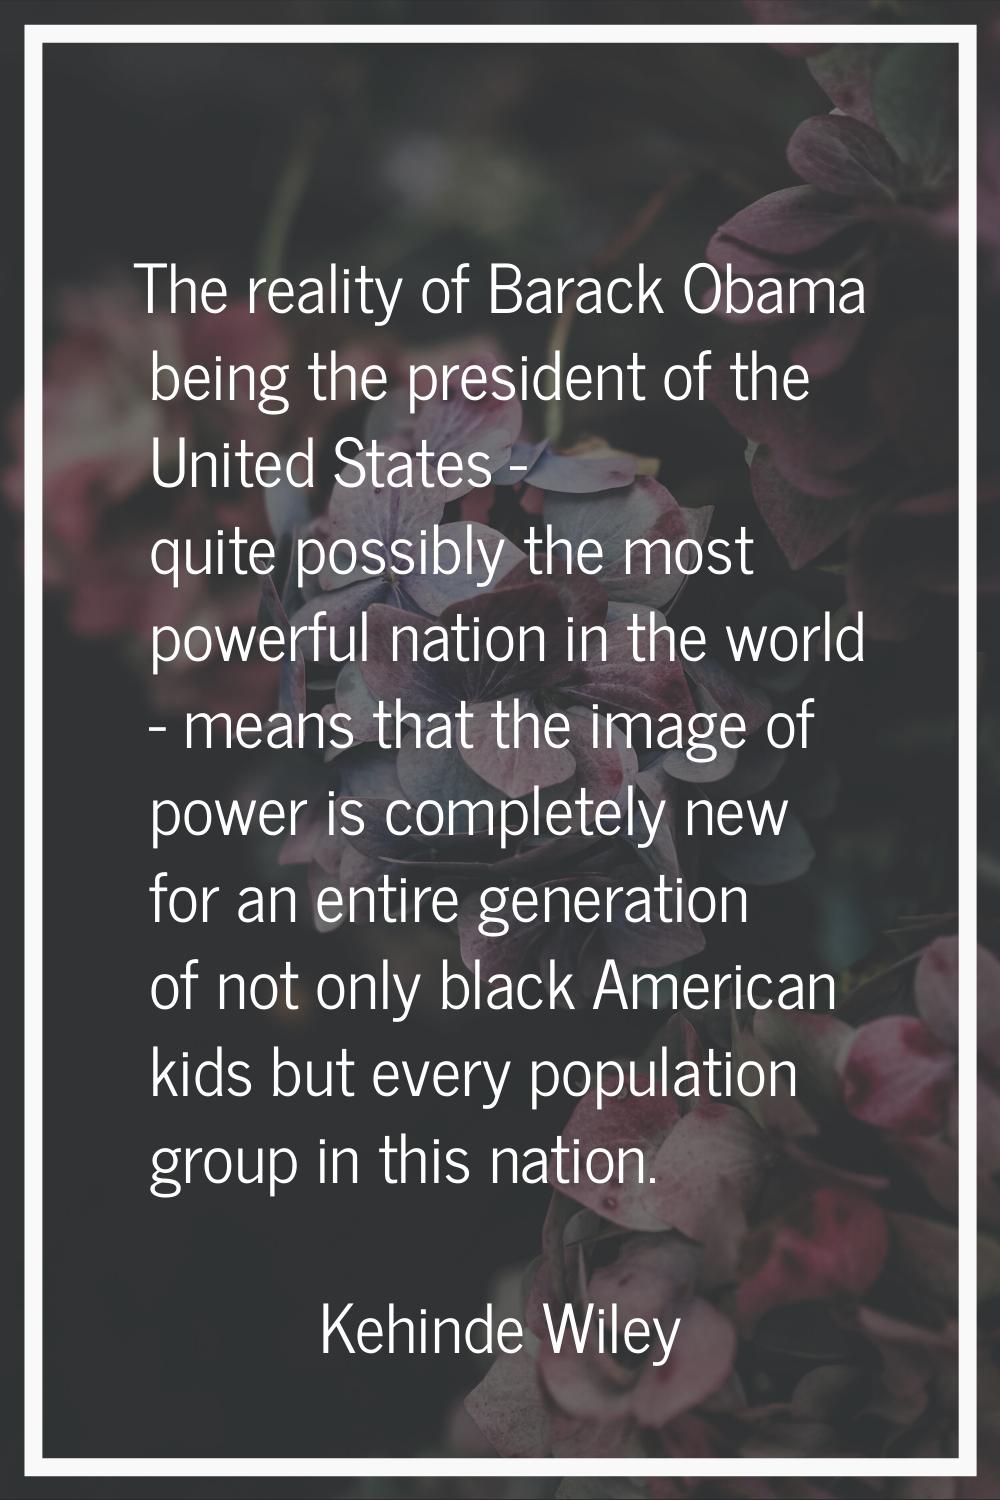 The reality of Barack Obama being the president of the United States - quite possibly the most powe